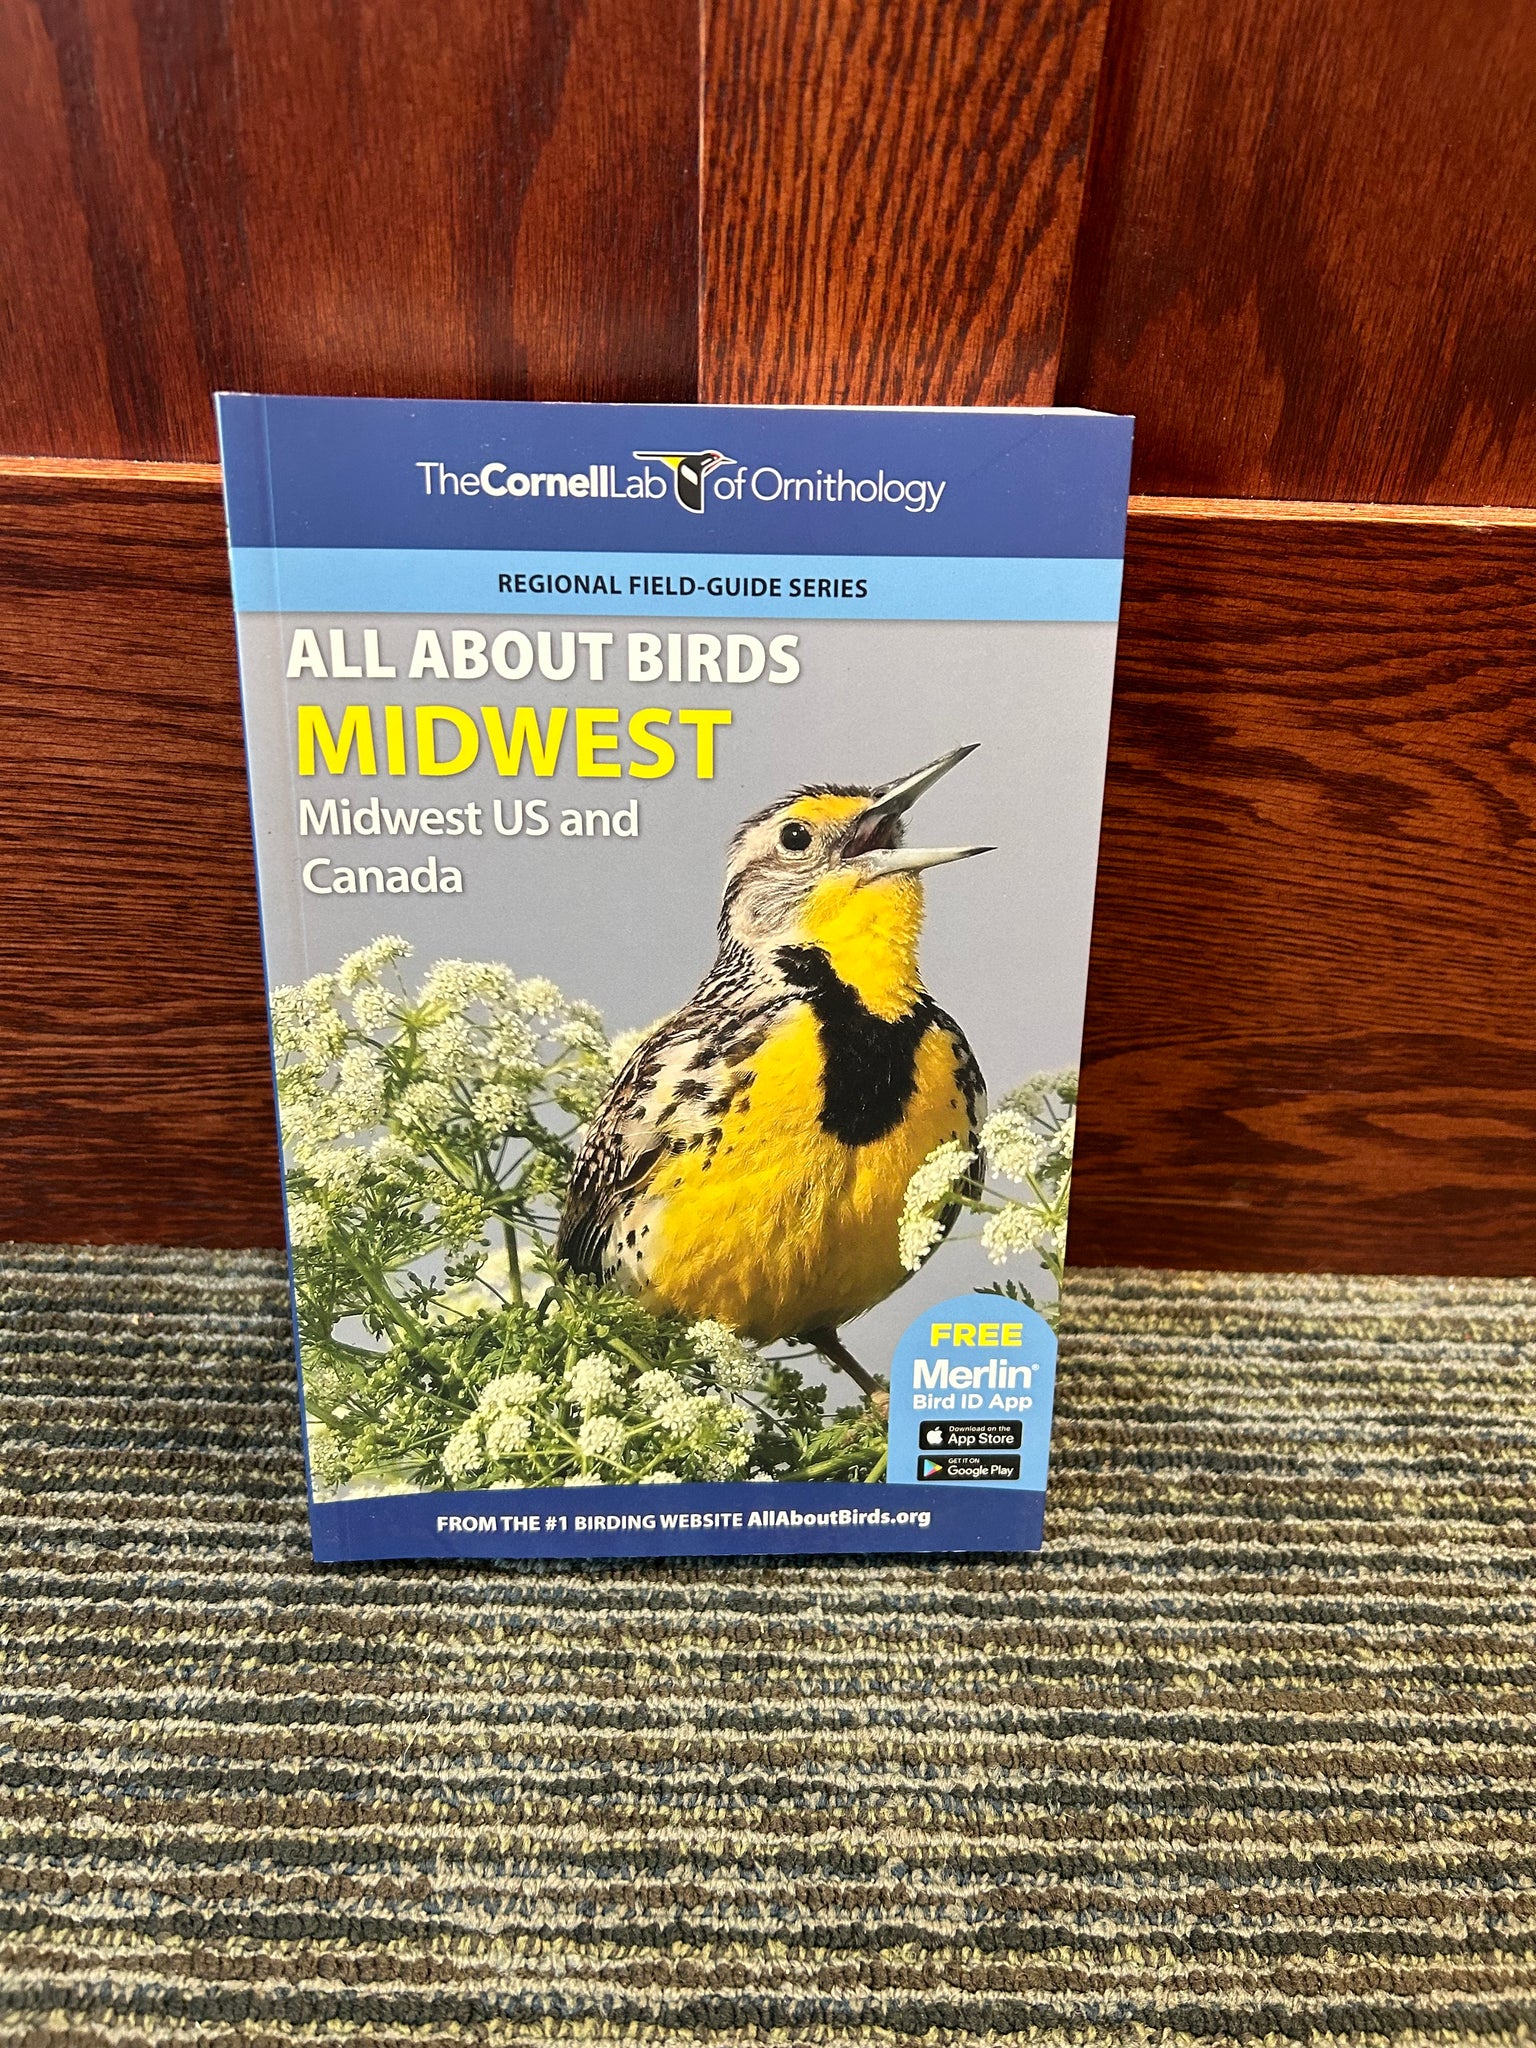 All About Birds Midwest (Midwest US and Canada)